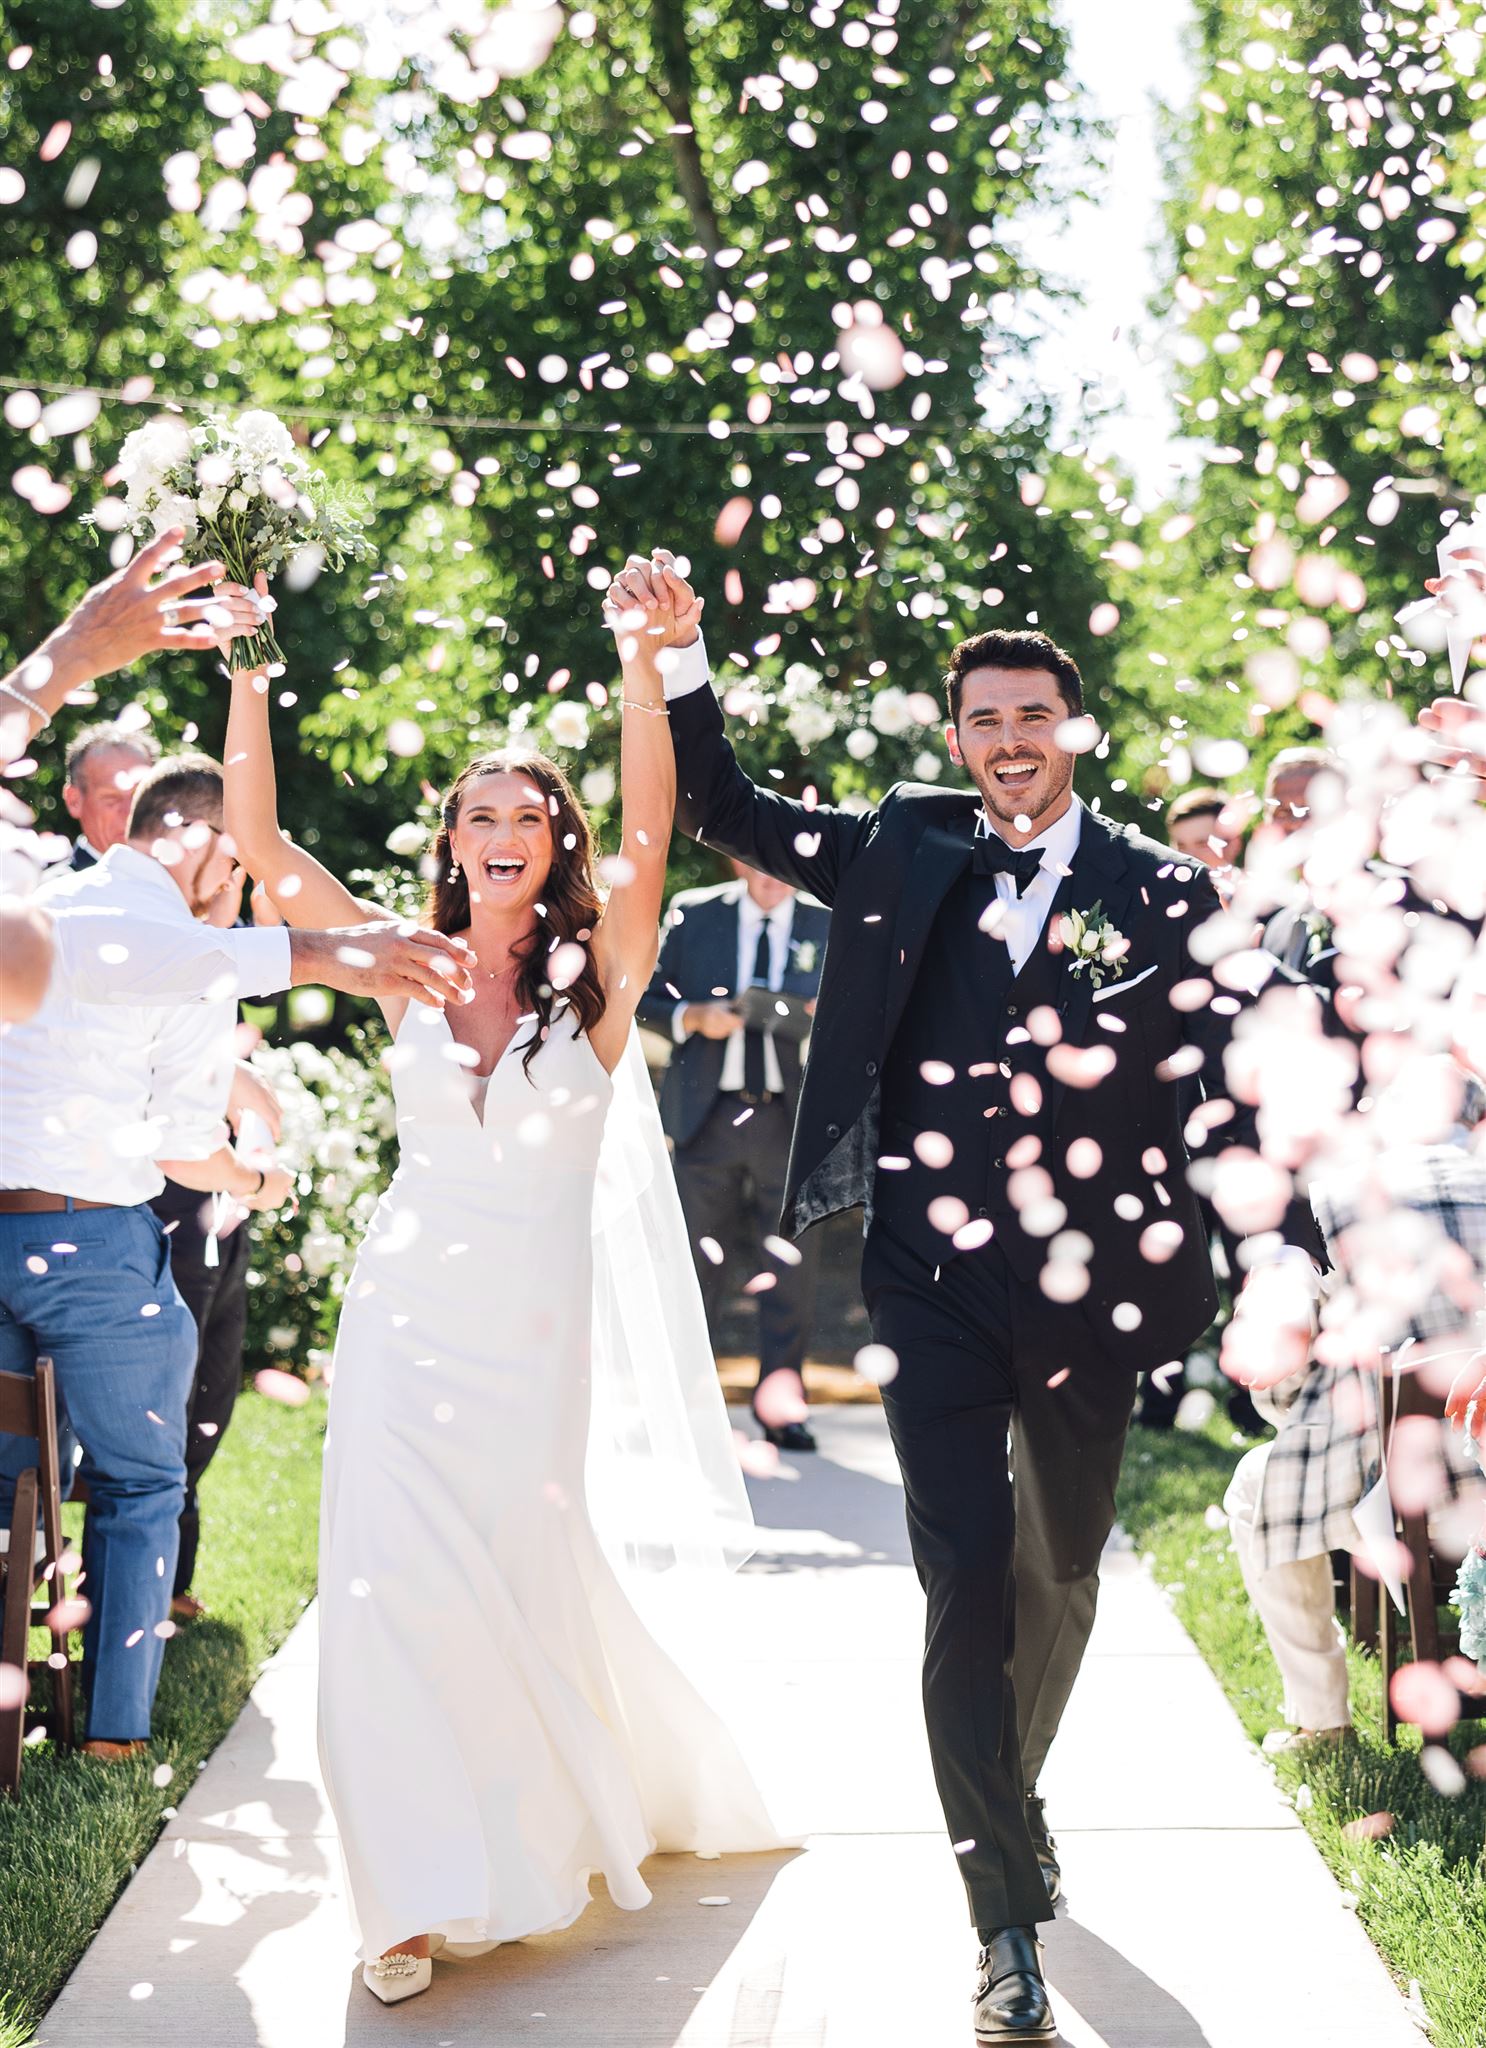 How to Make the Most of a Wedding Ceremony Confetti Exit